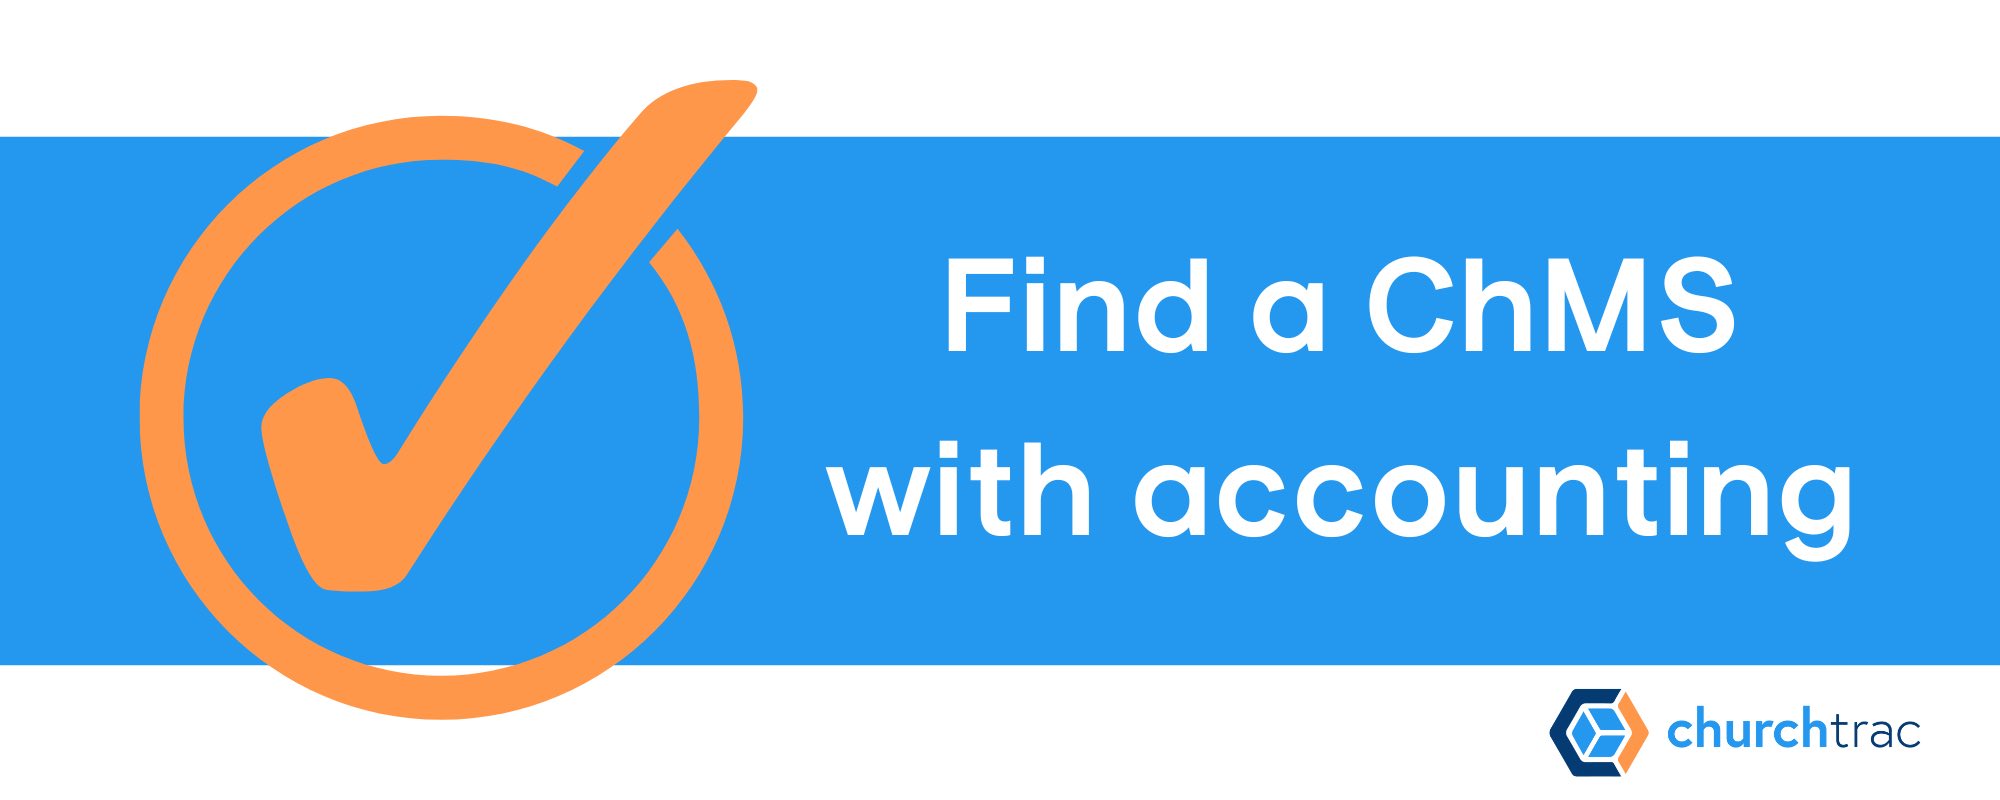 Ditch Quickbooks and find a ChMS that includes church accounting